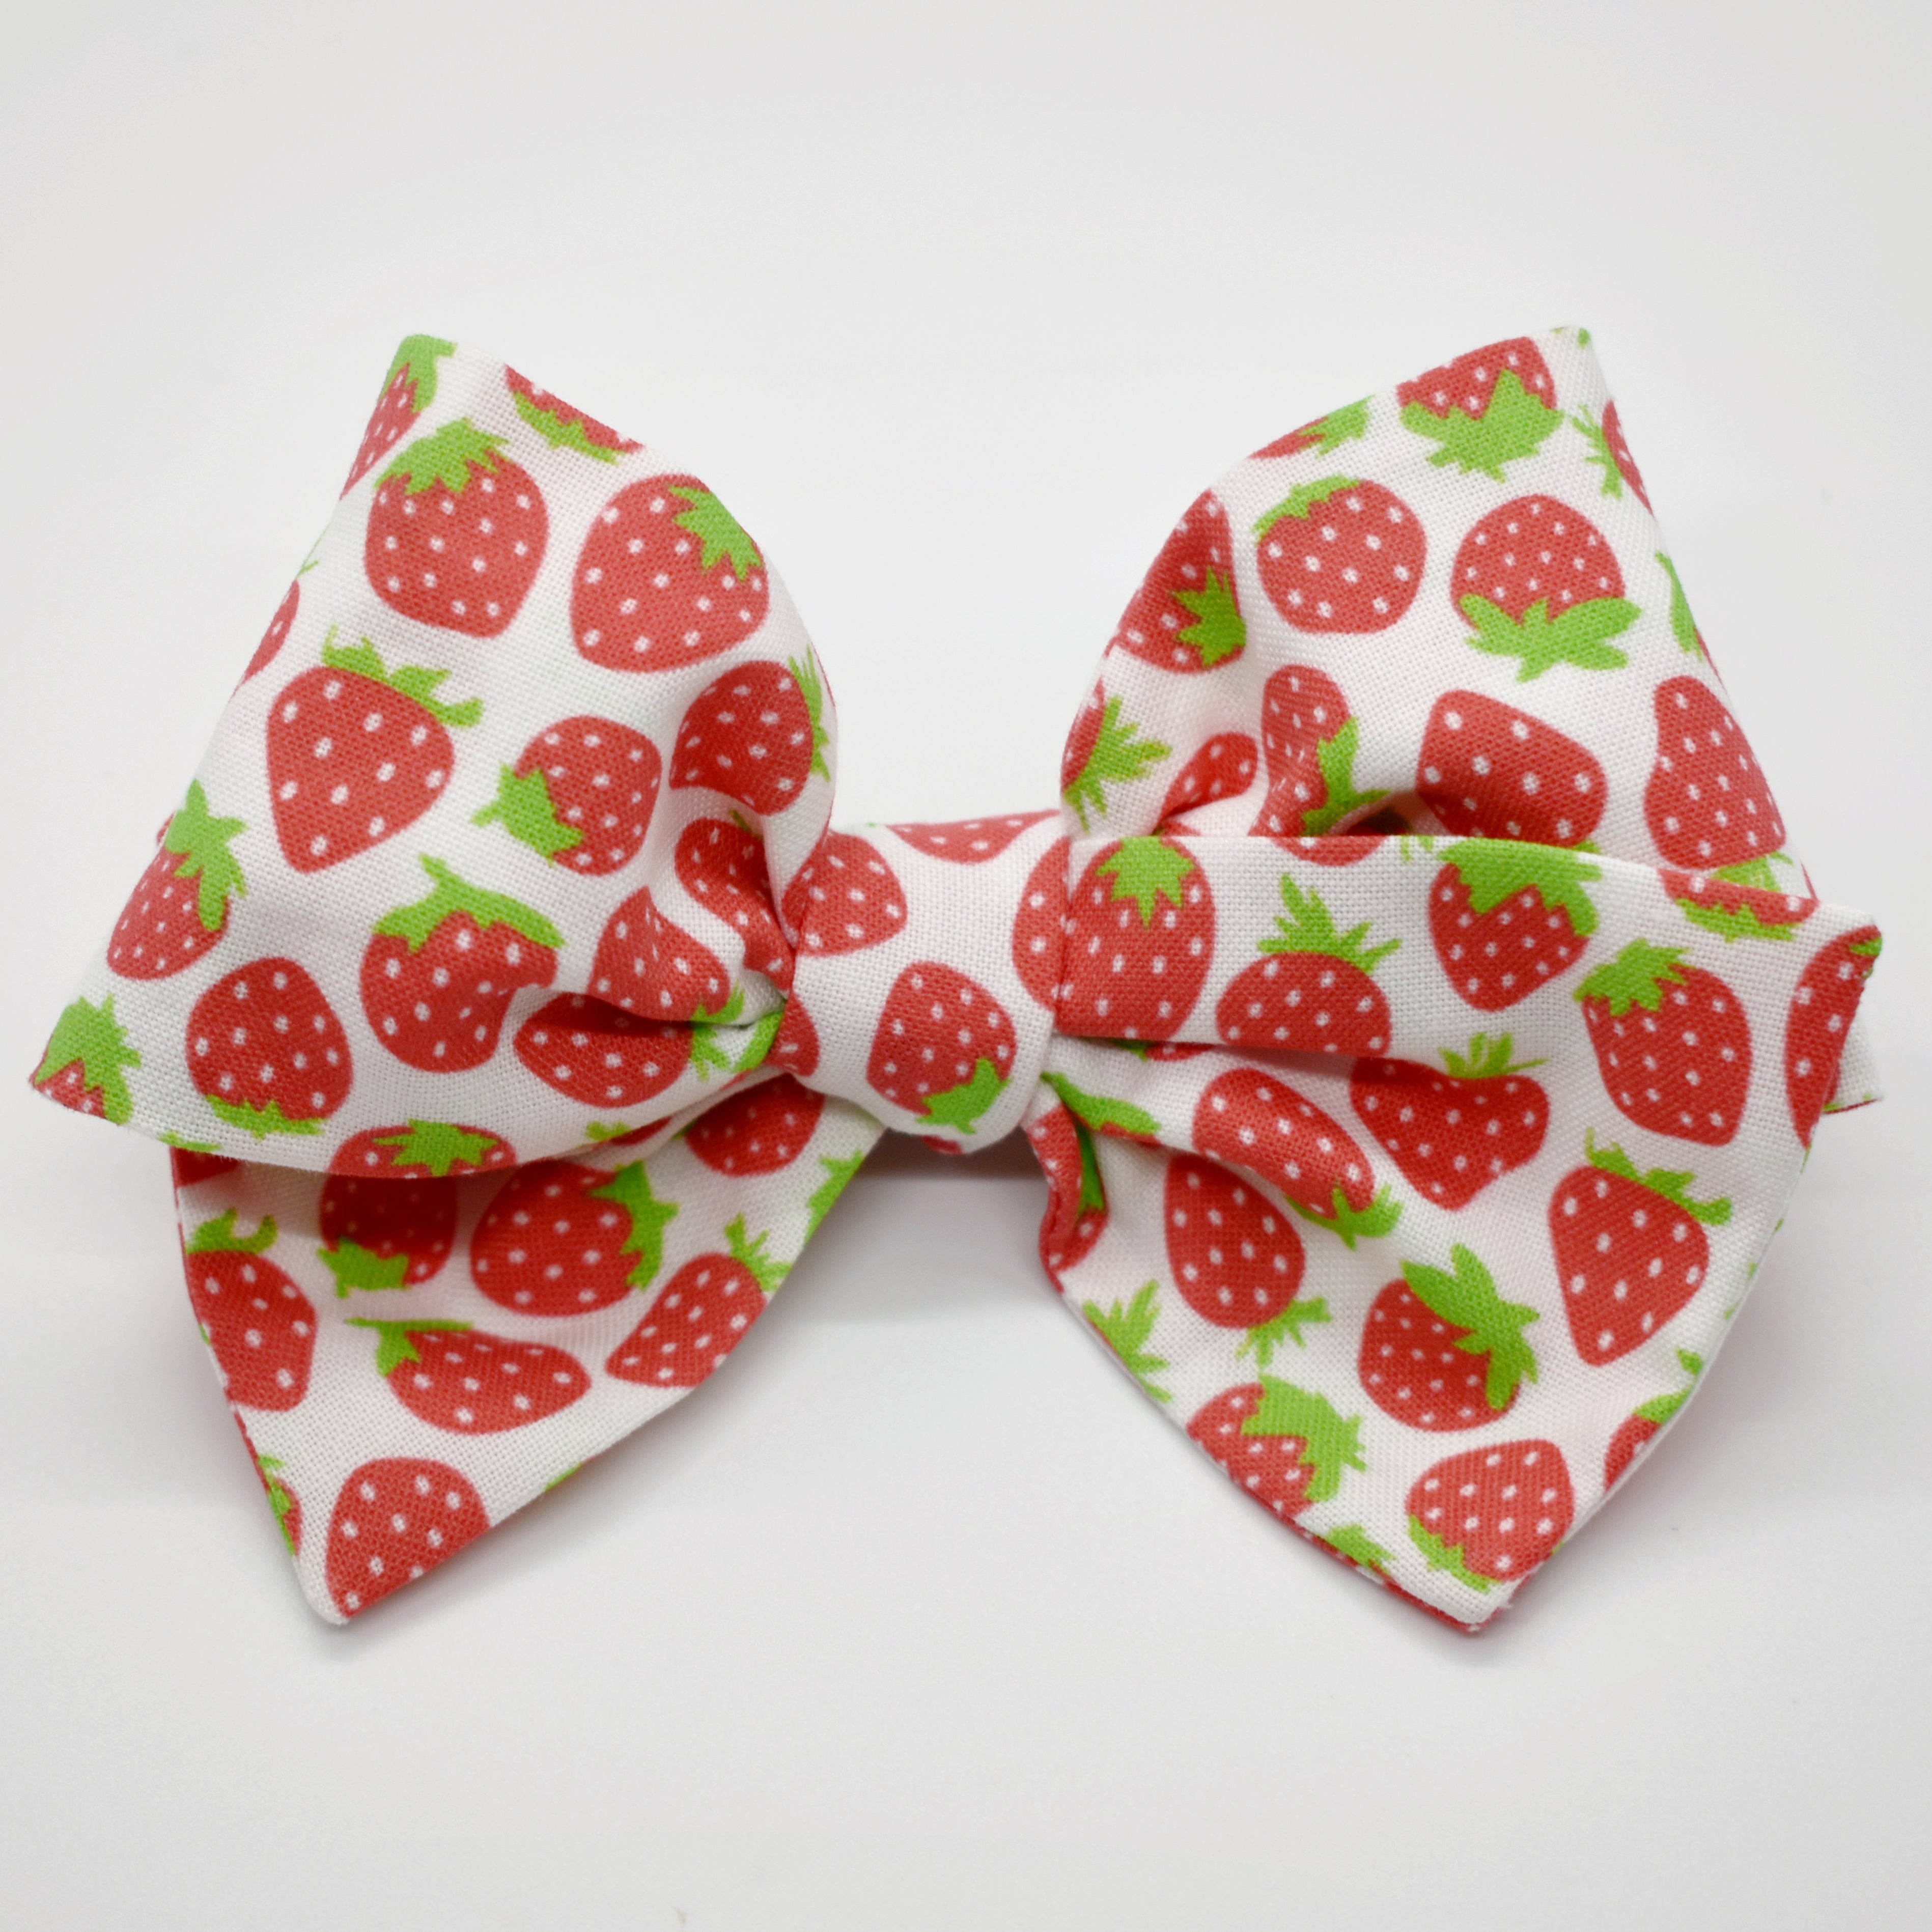 Strawberry Fruit Bows - Wired Field of Strawberries Fruit Bows 8 Inch